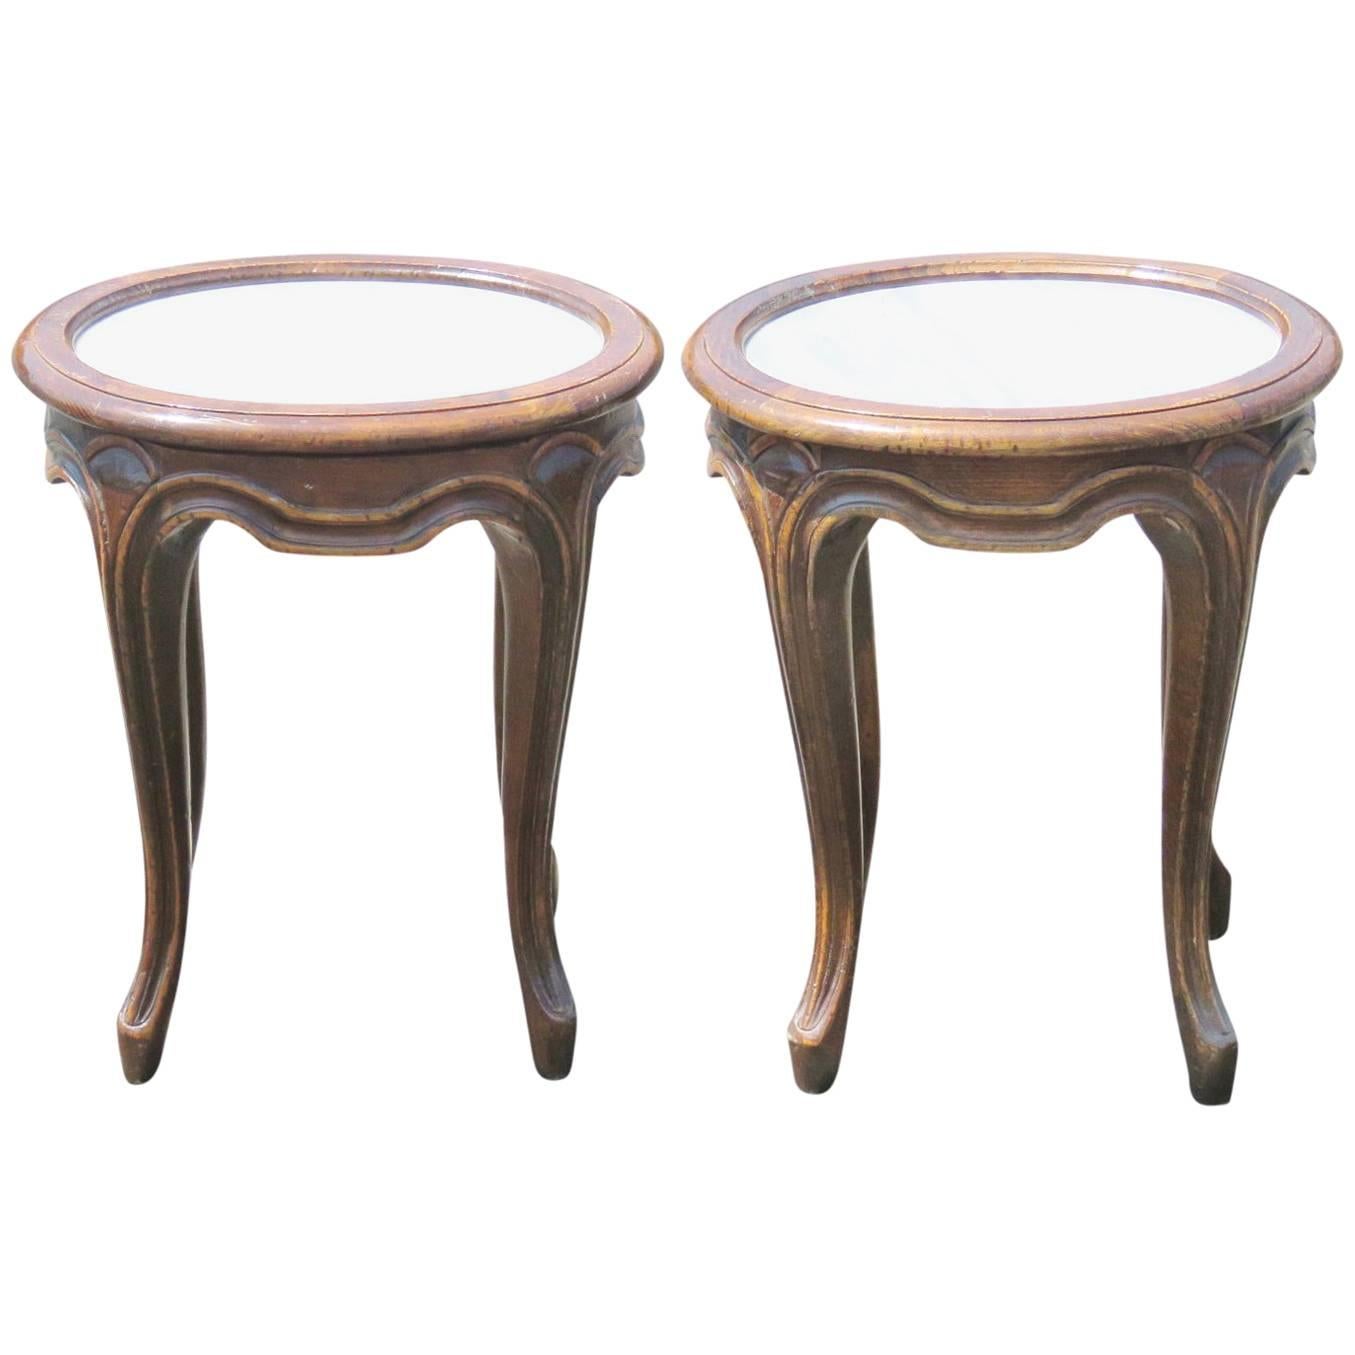 Pair of French Provincial Marbletop Walnut Stands For Sale